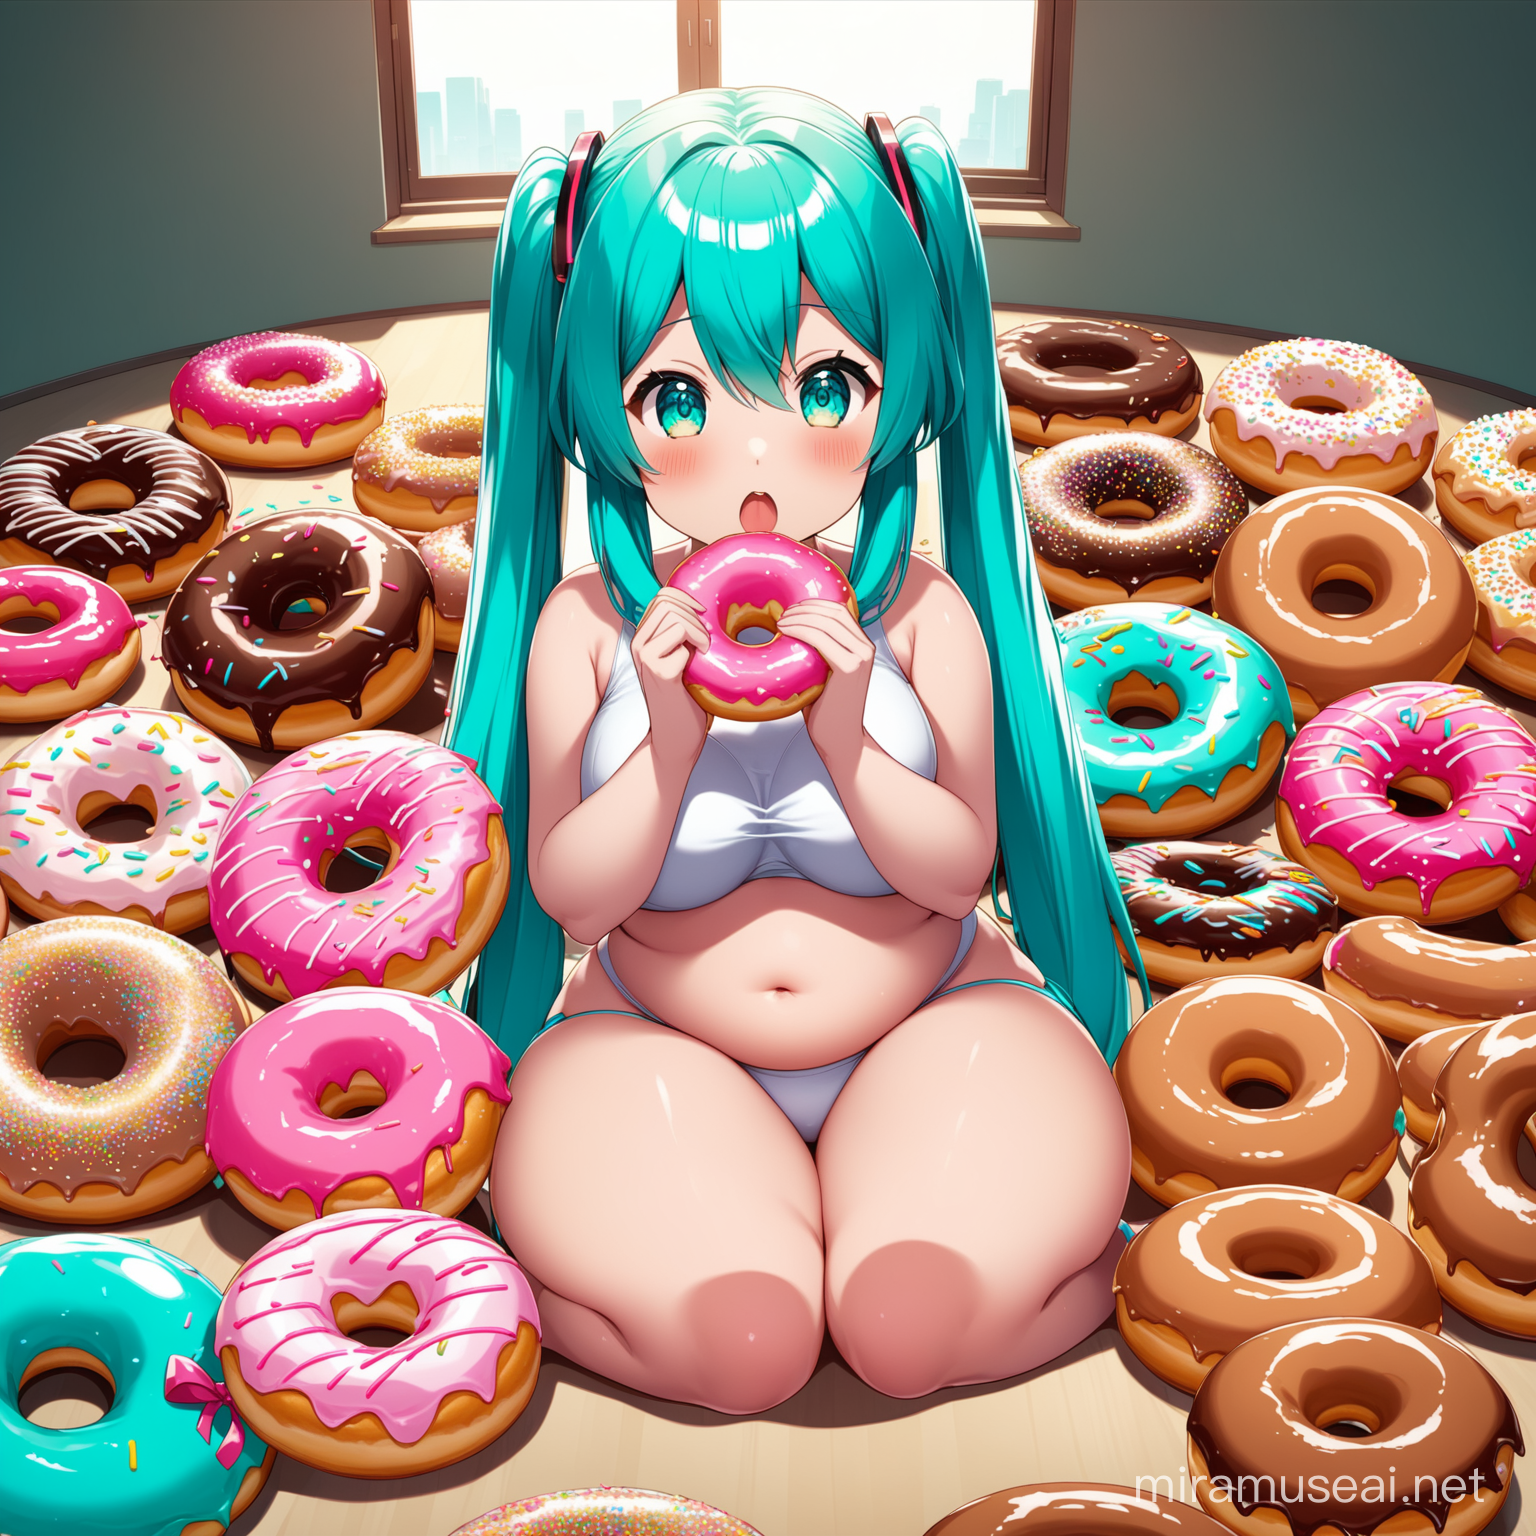 Fat and chubby and Hatsune miku eat a ton of donuts in a room filled with donuts)
(HD, 4k)